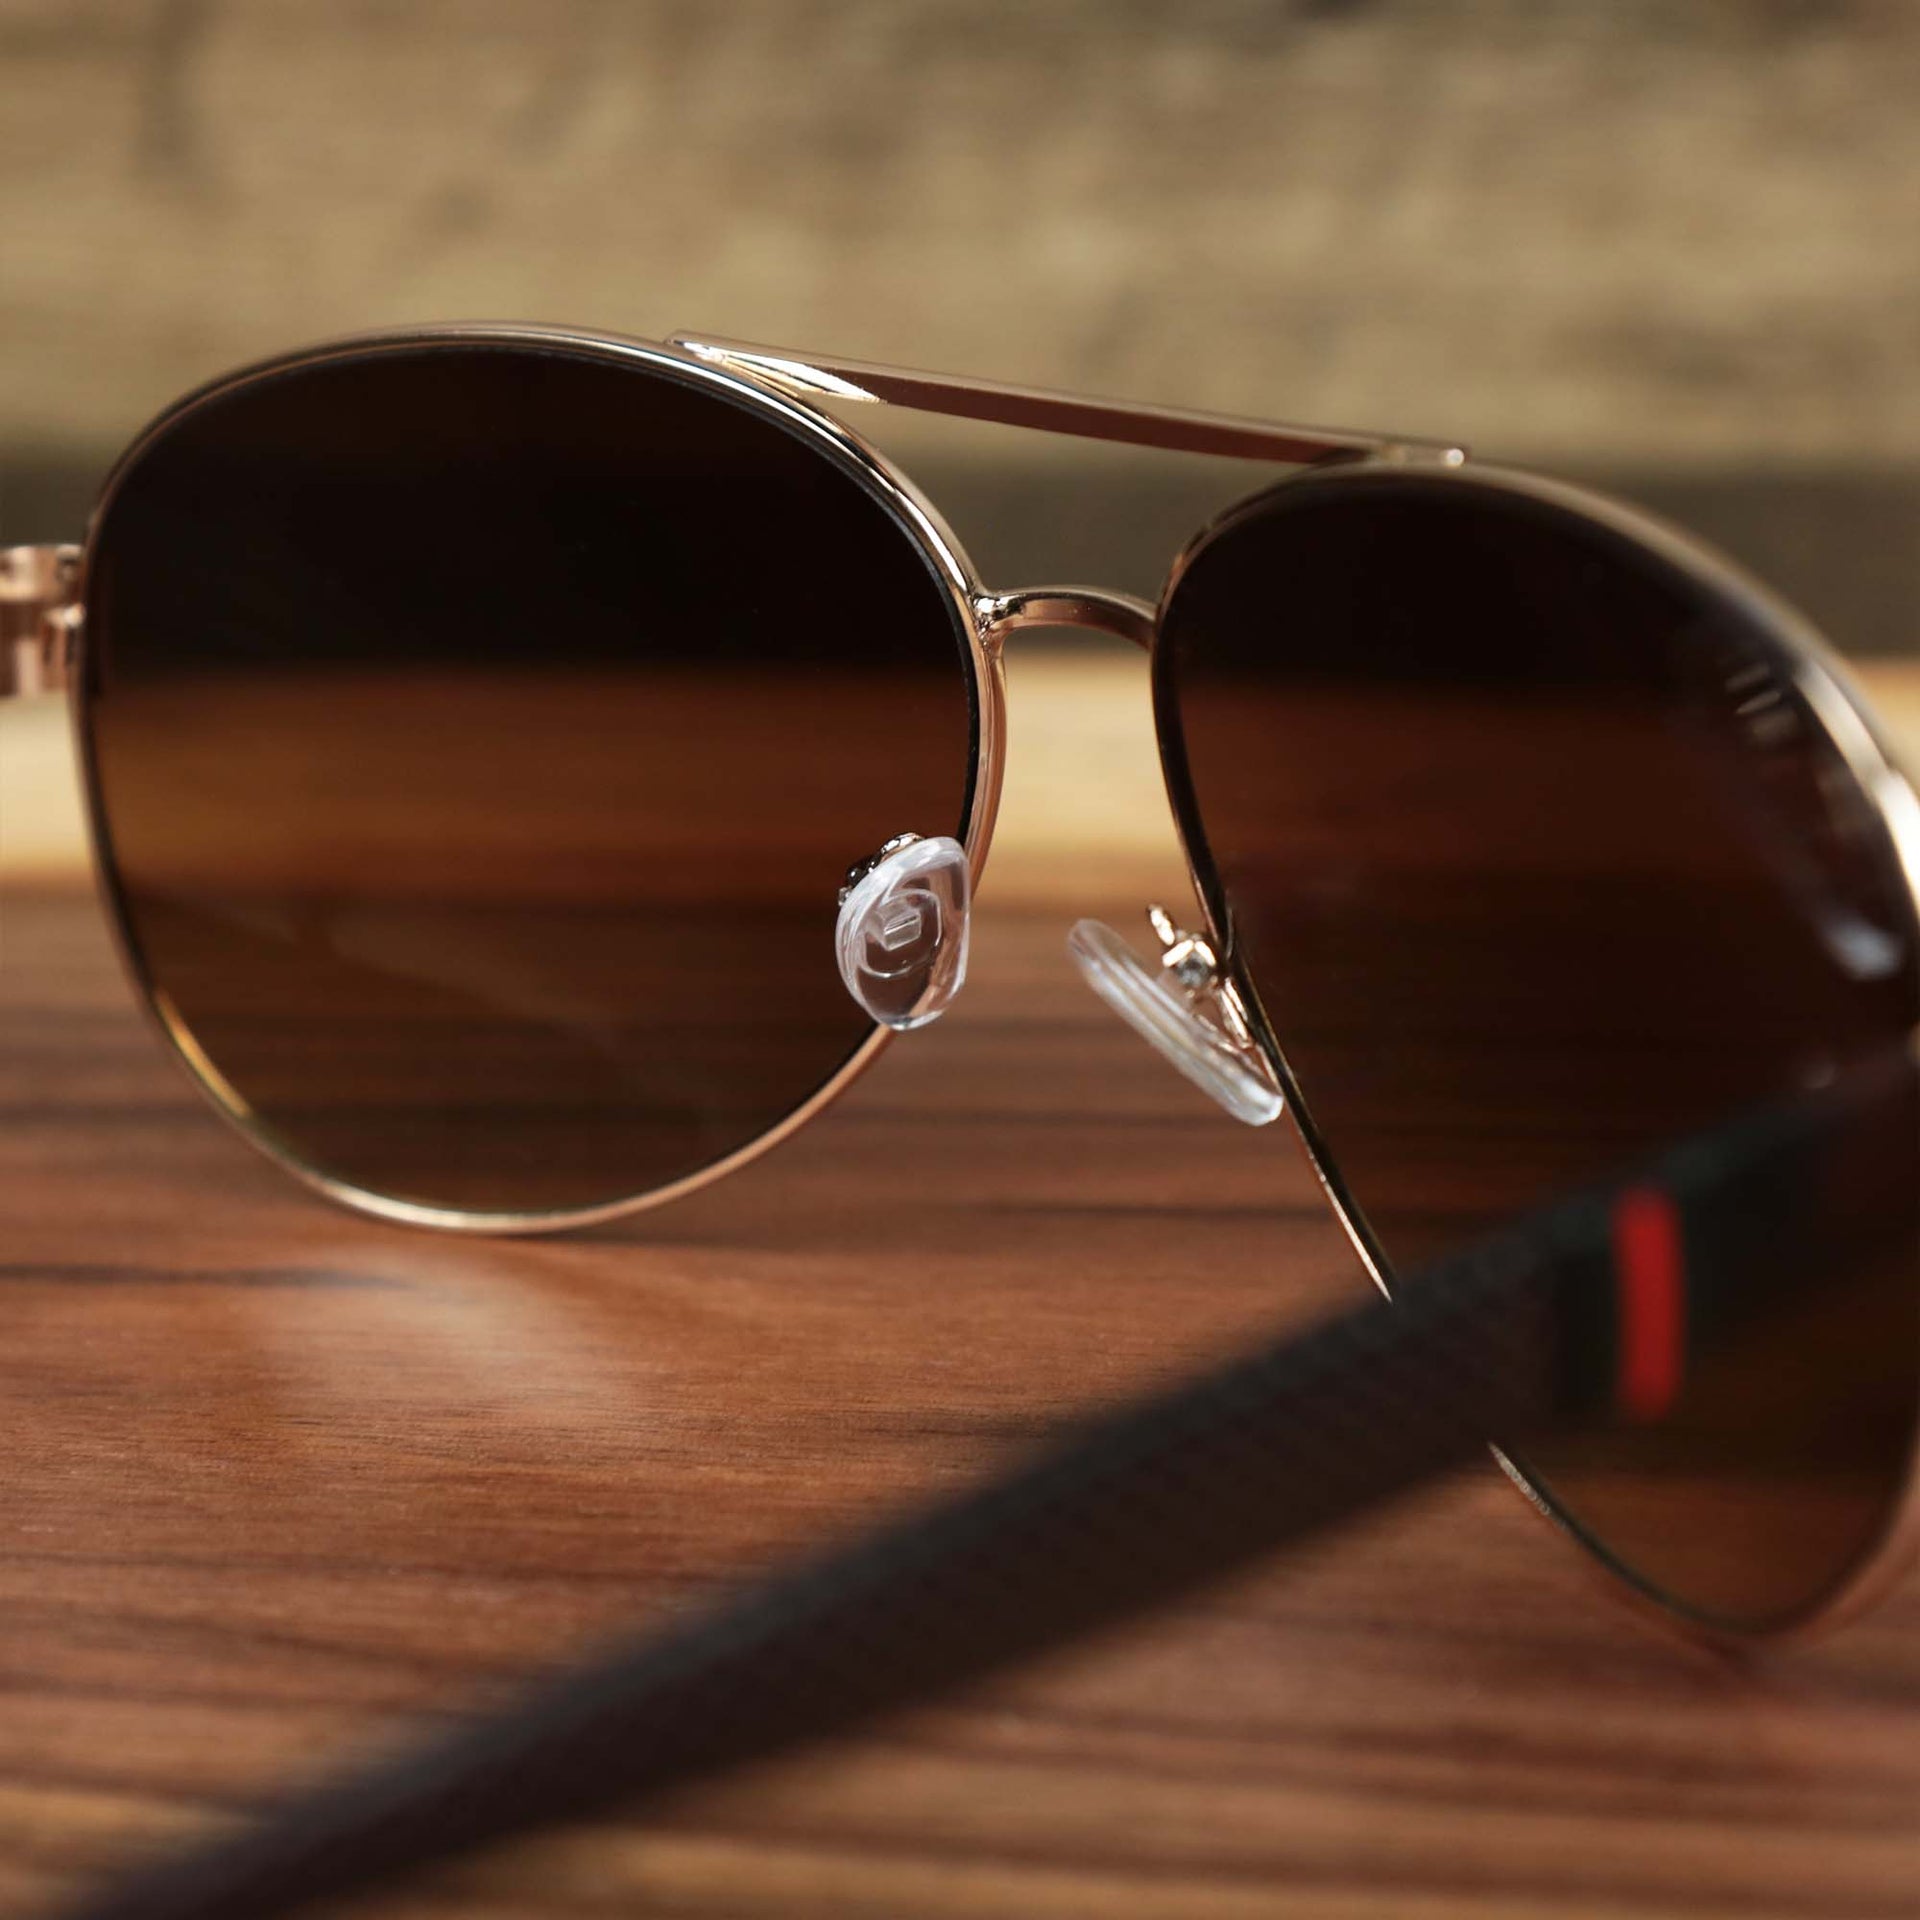 The inside of the Aviator Frame Racing Stripes Brown Lens Sunglasses with Rose Gold Frame